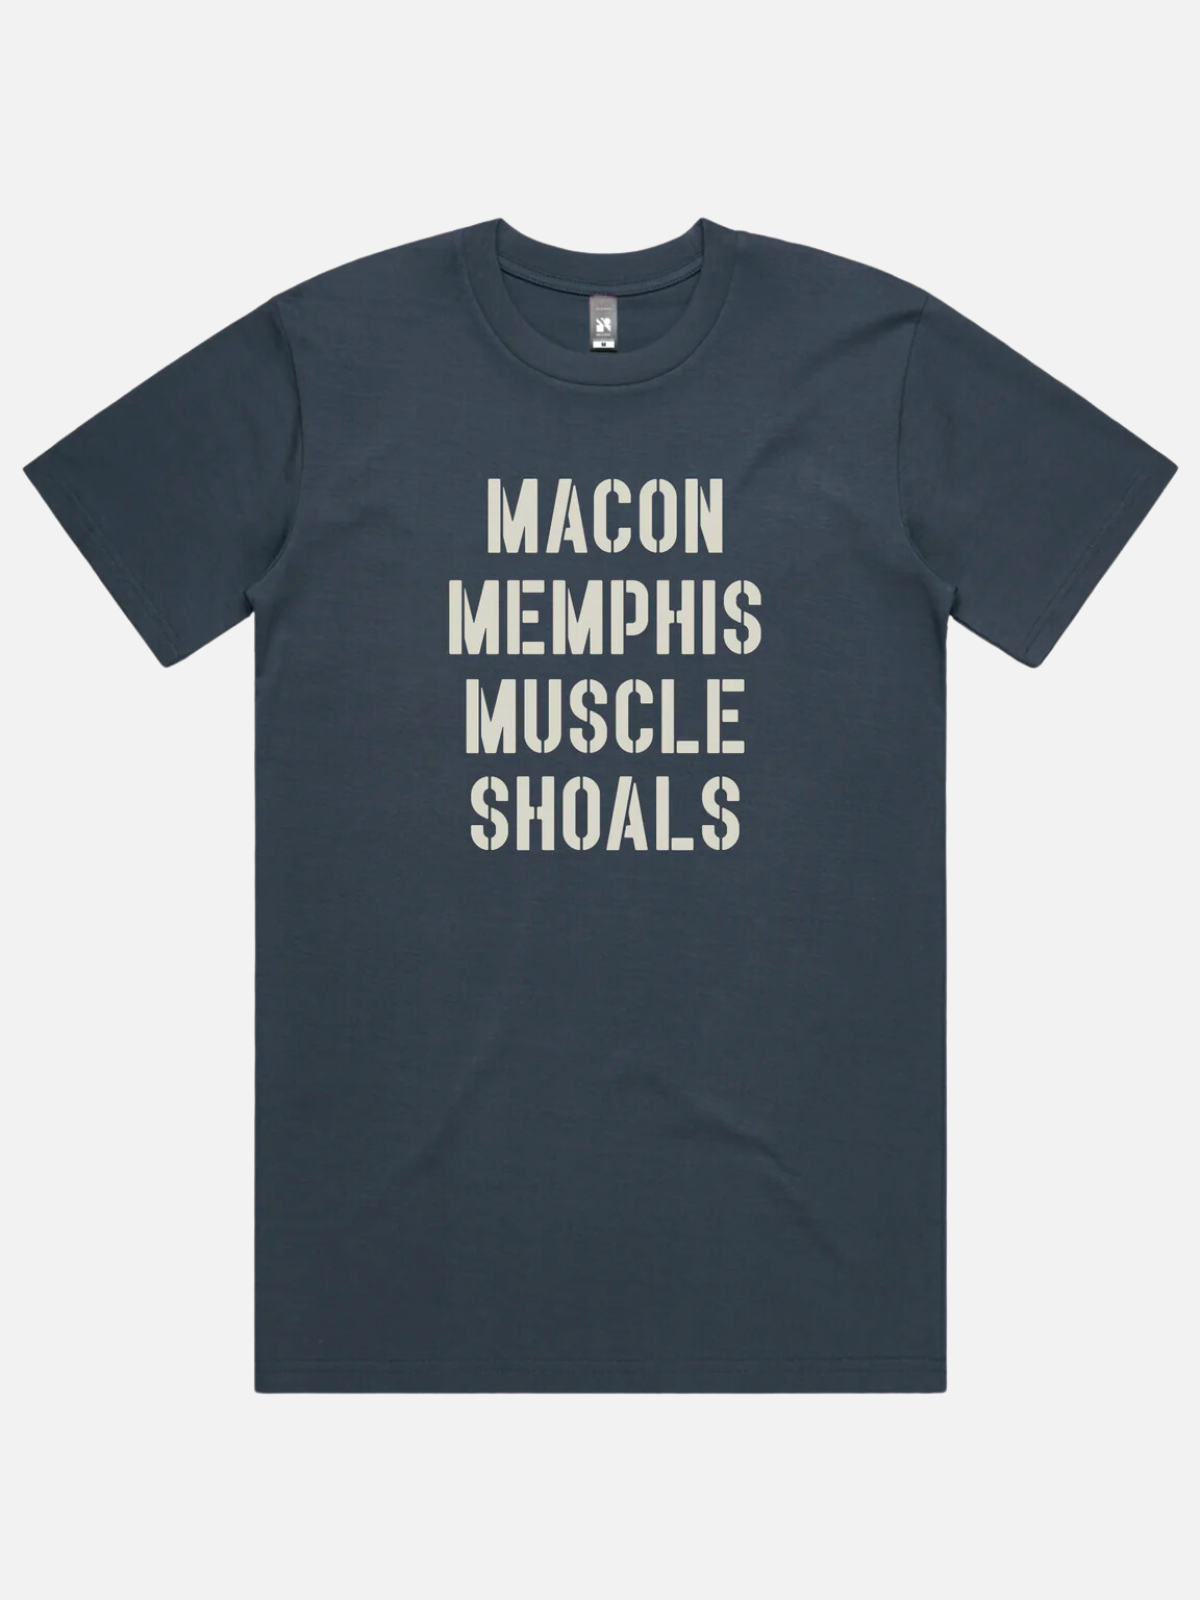 bitter southerner macon memphis muscle shoals music city tee 100% cotton graphic t-shirt ss short sleeve kempt athens ga georgia men's clothing store